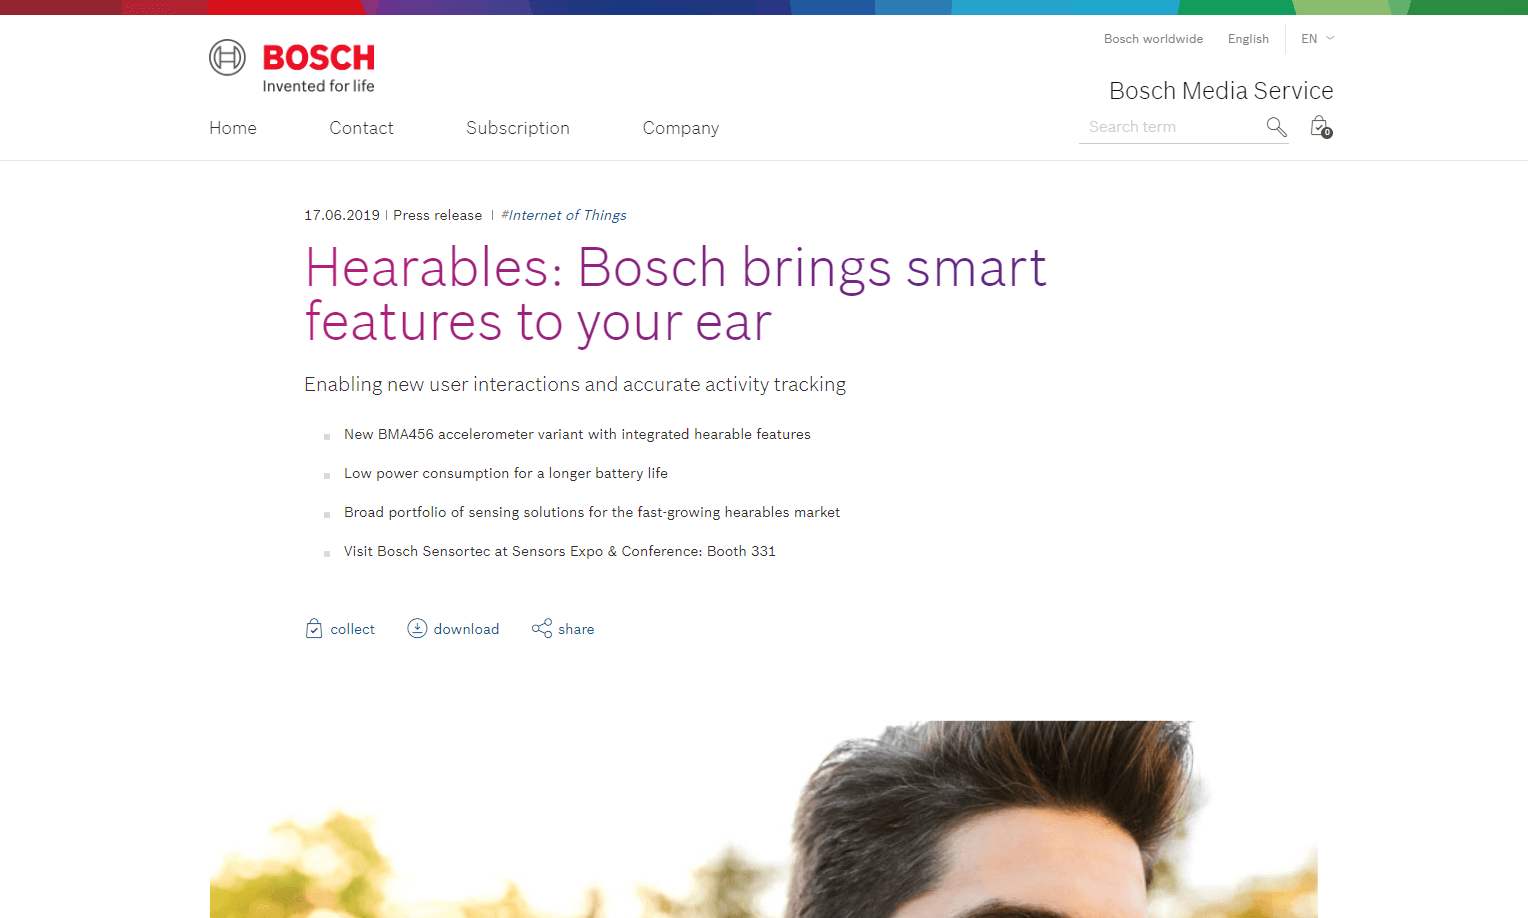 Hearables Bosch brings smart features to your ear - Bosch Media Service